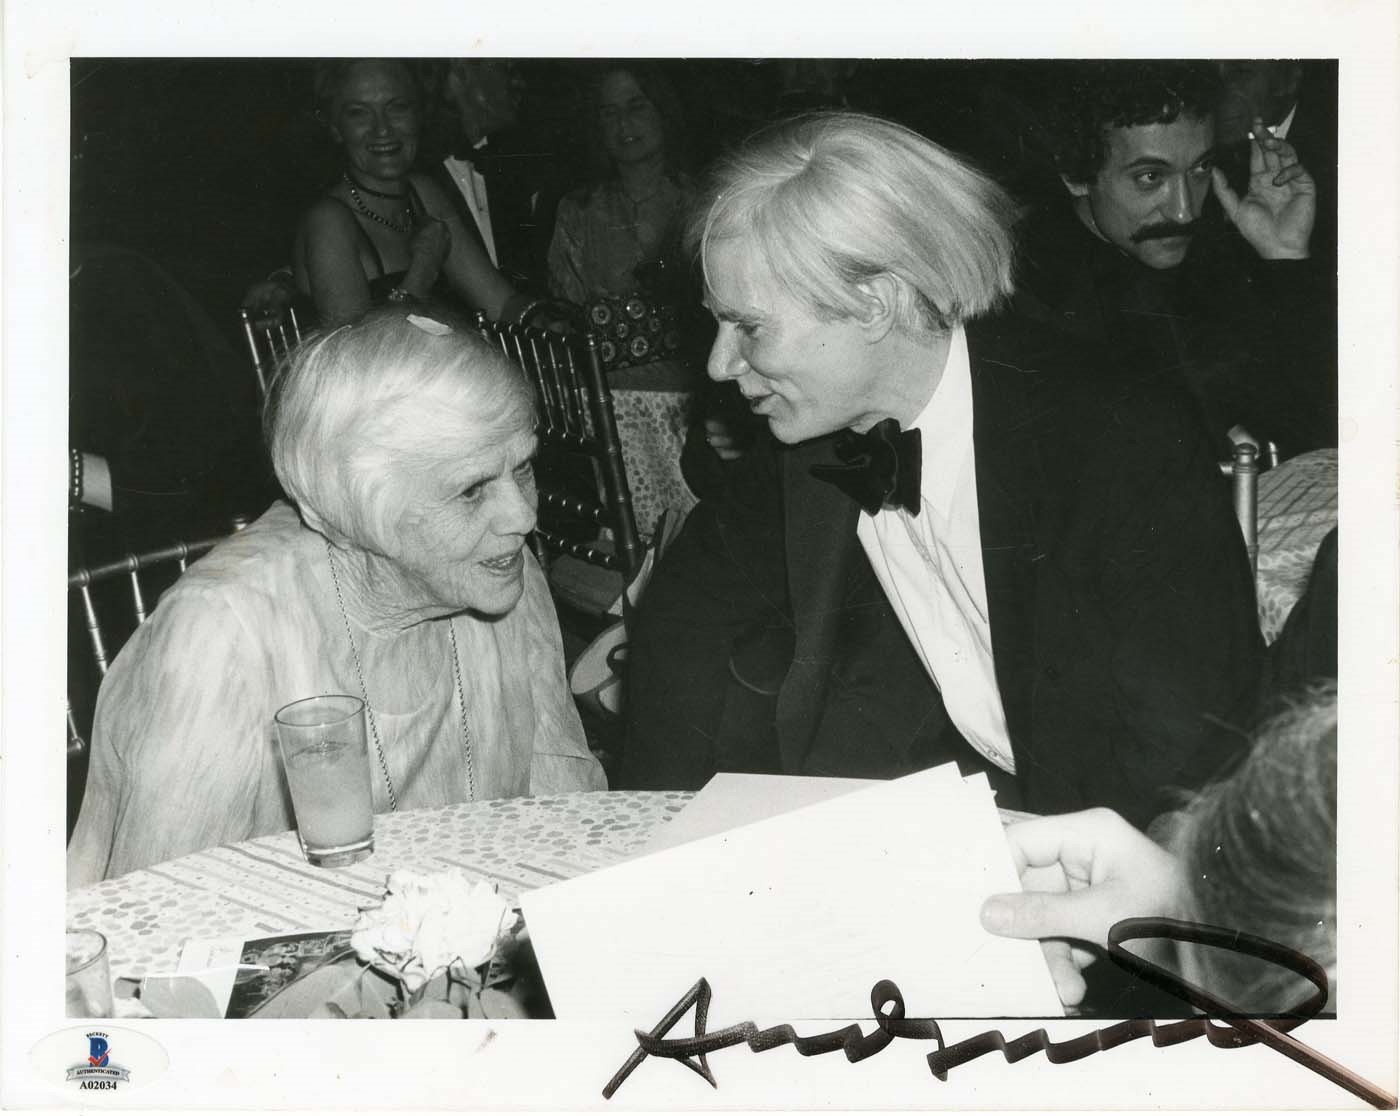 Rock And Pop Culture - 1977 Andy Warhol Signed Photograph with Lillian Carter at Studio 54 (Beckett)